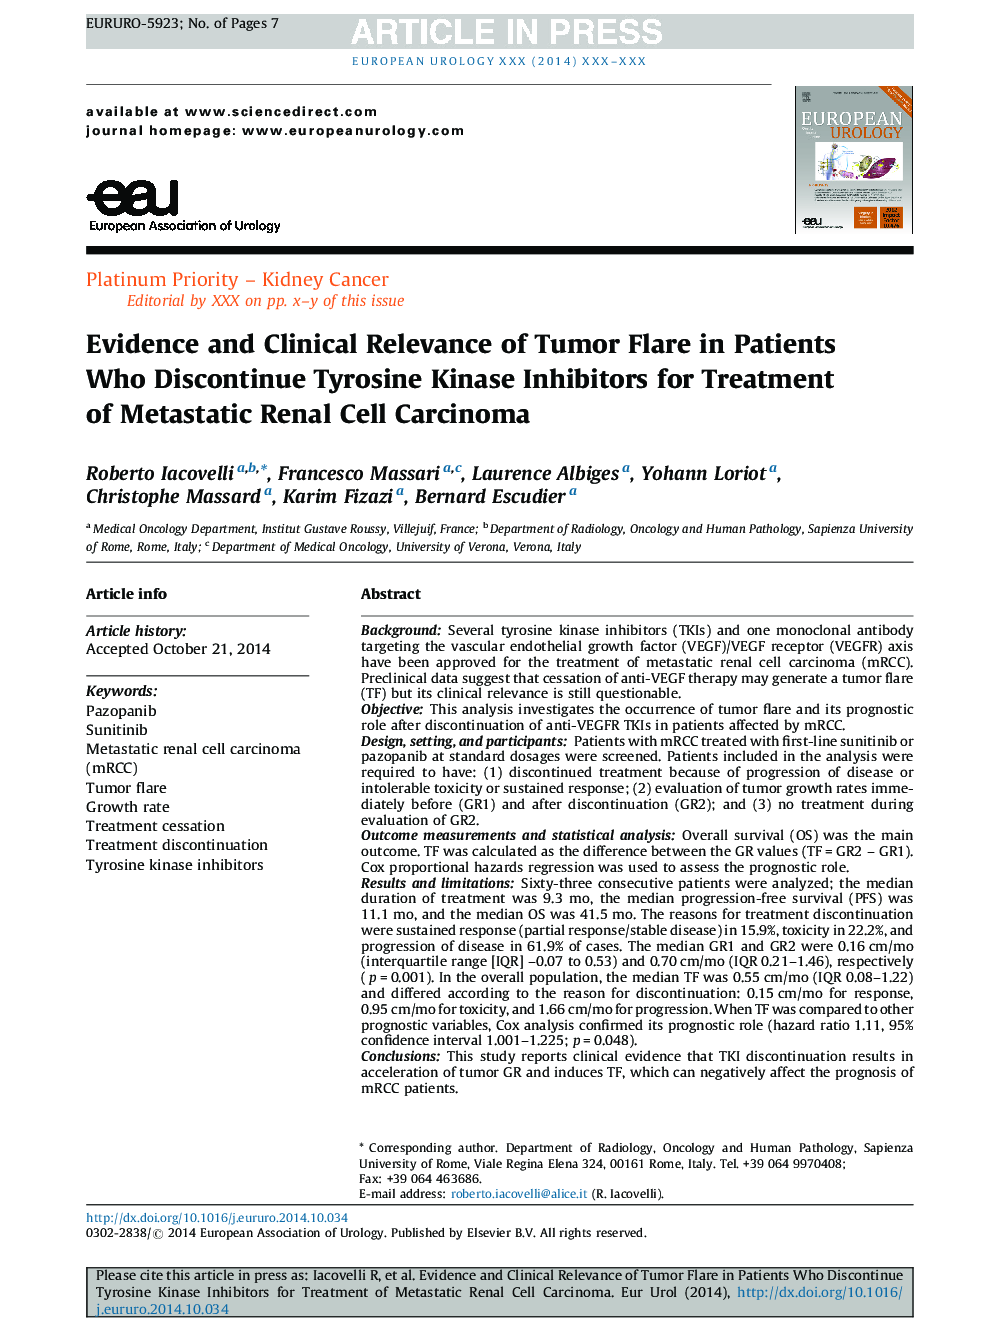 Evidence and Clinical Relevance of Tumor Flare in Patients Who Discontinue Tyrosine Kinase Inhibitors for Treatment of Metastatic Renal Cell Carcinoma